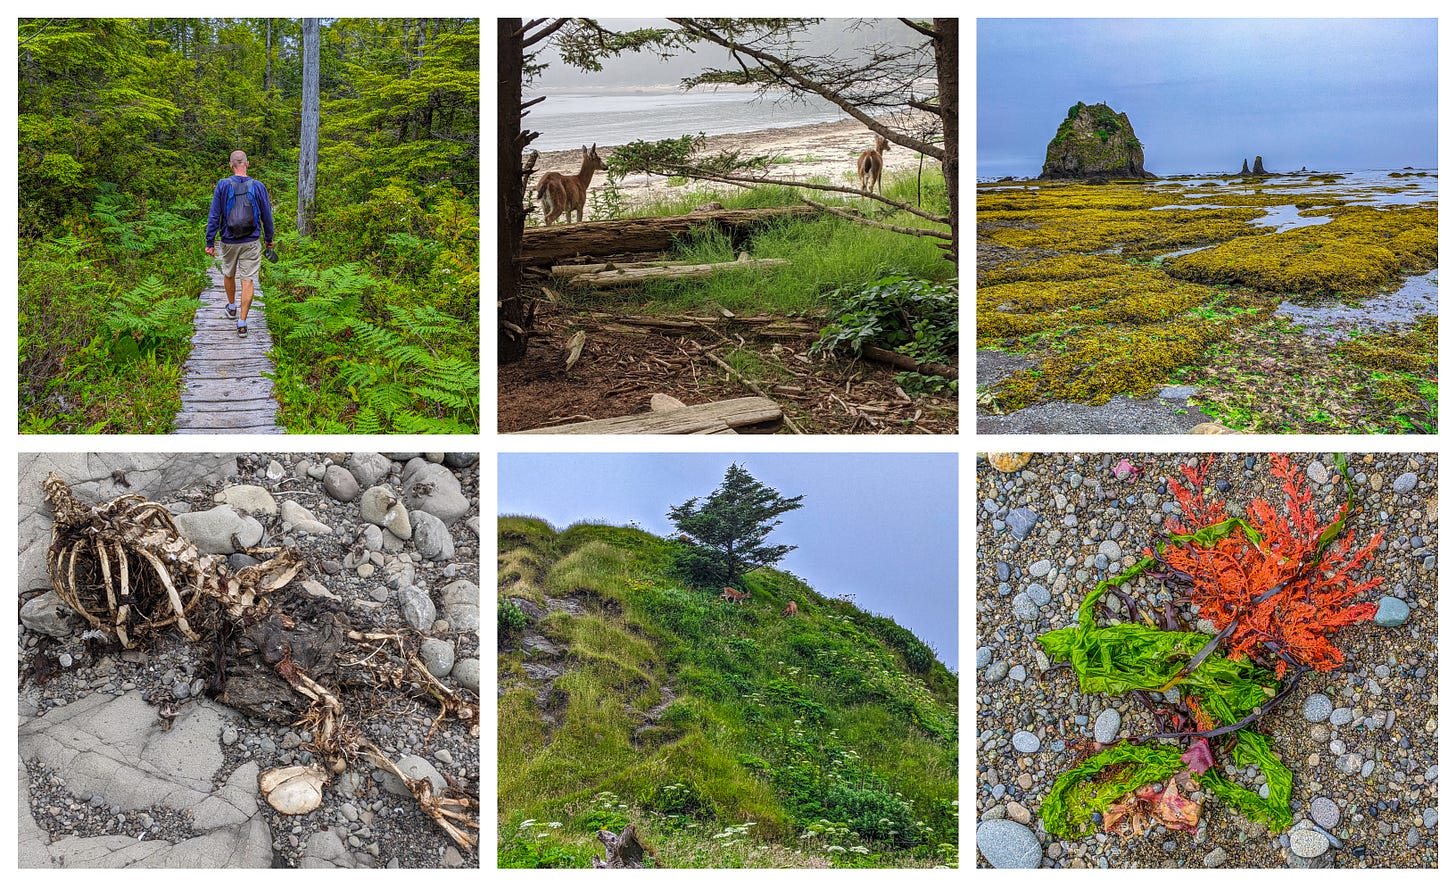 Scenes from the Ozette Loop.